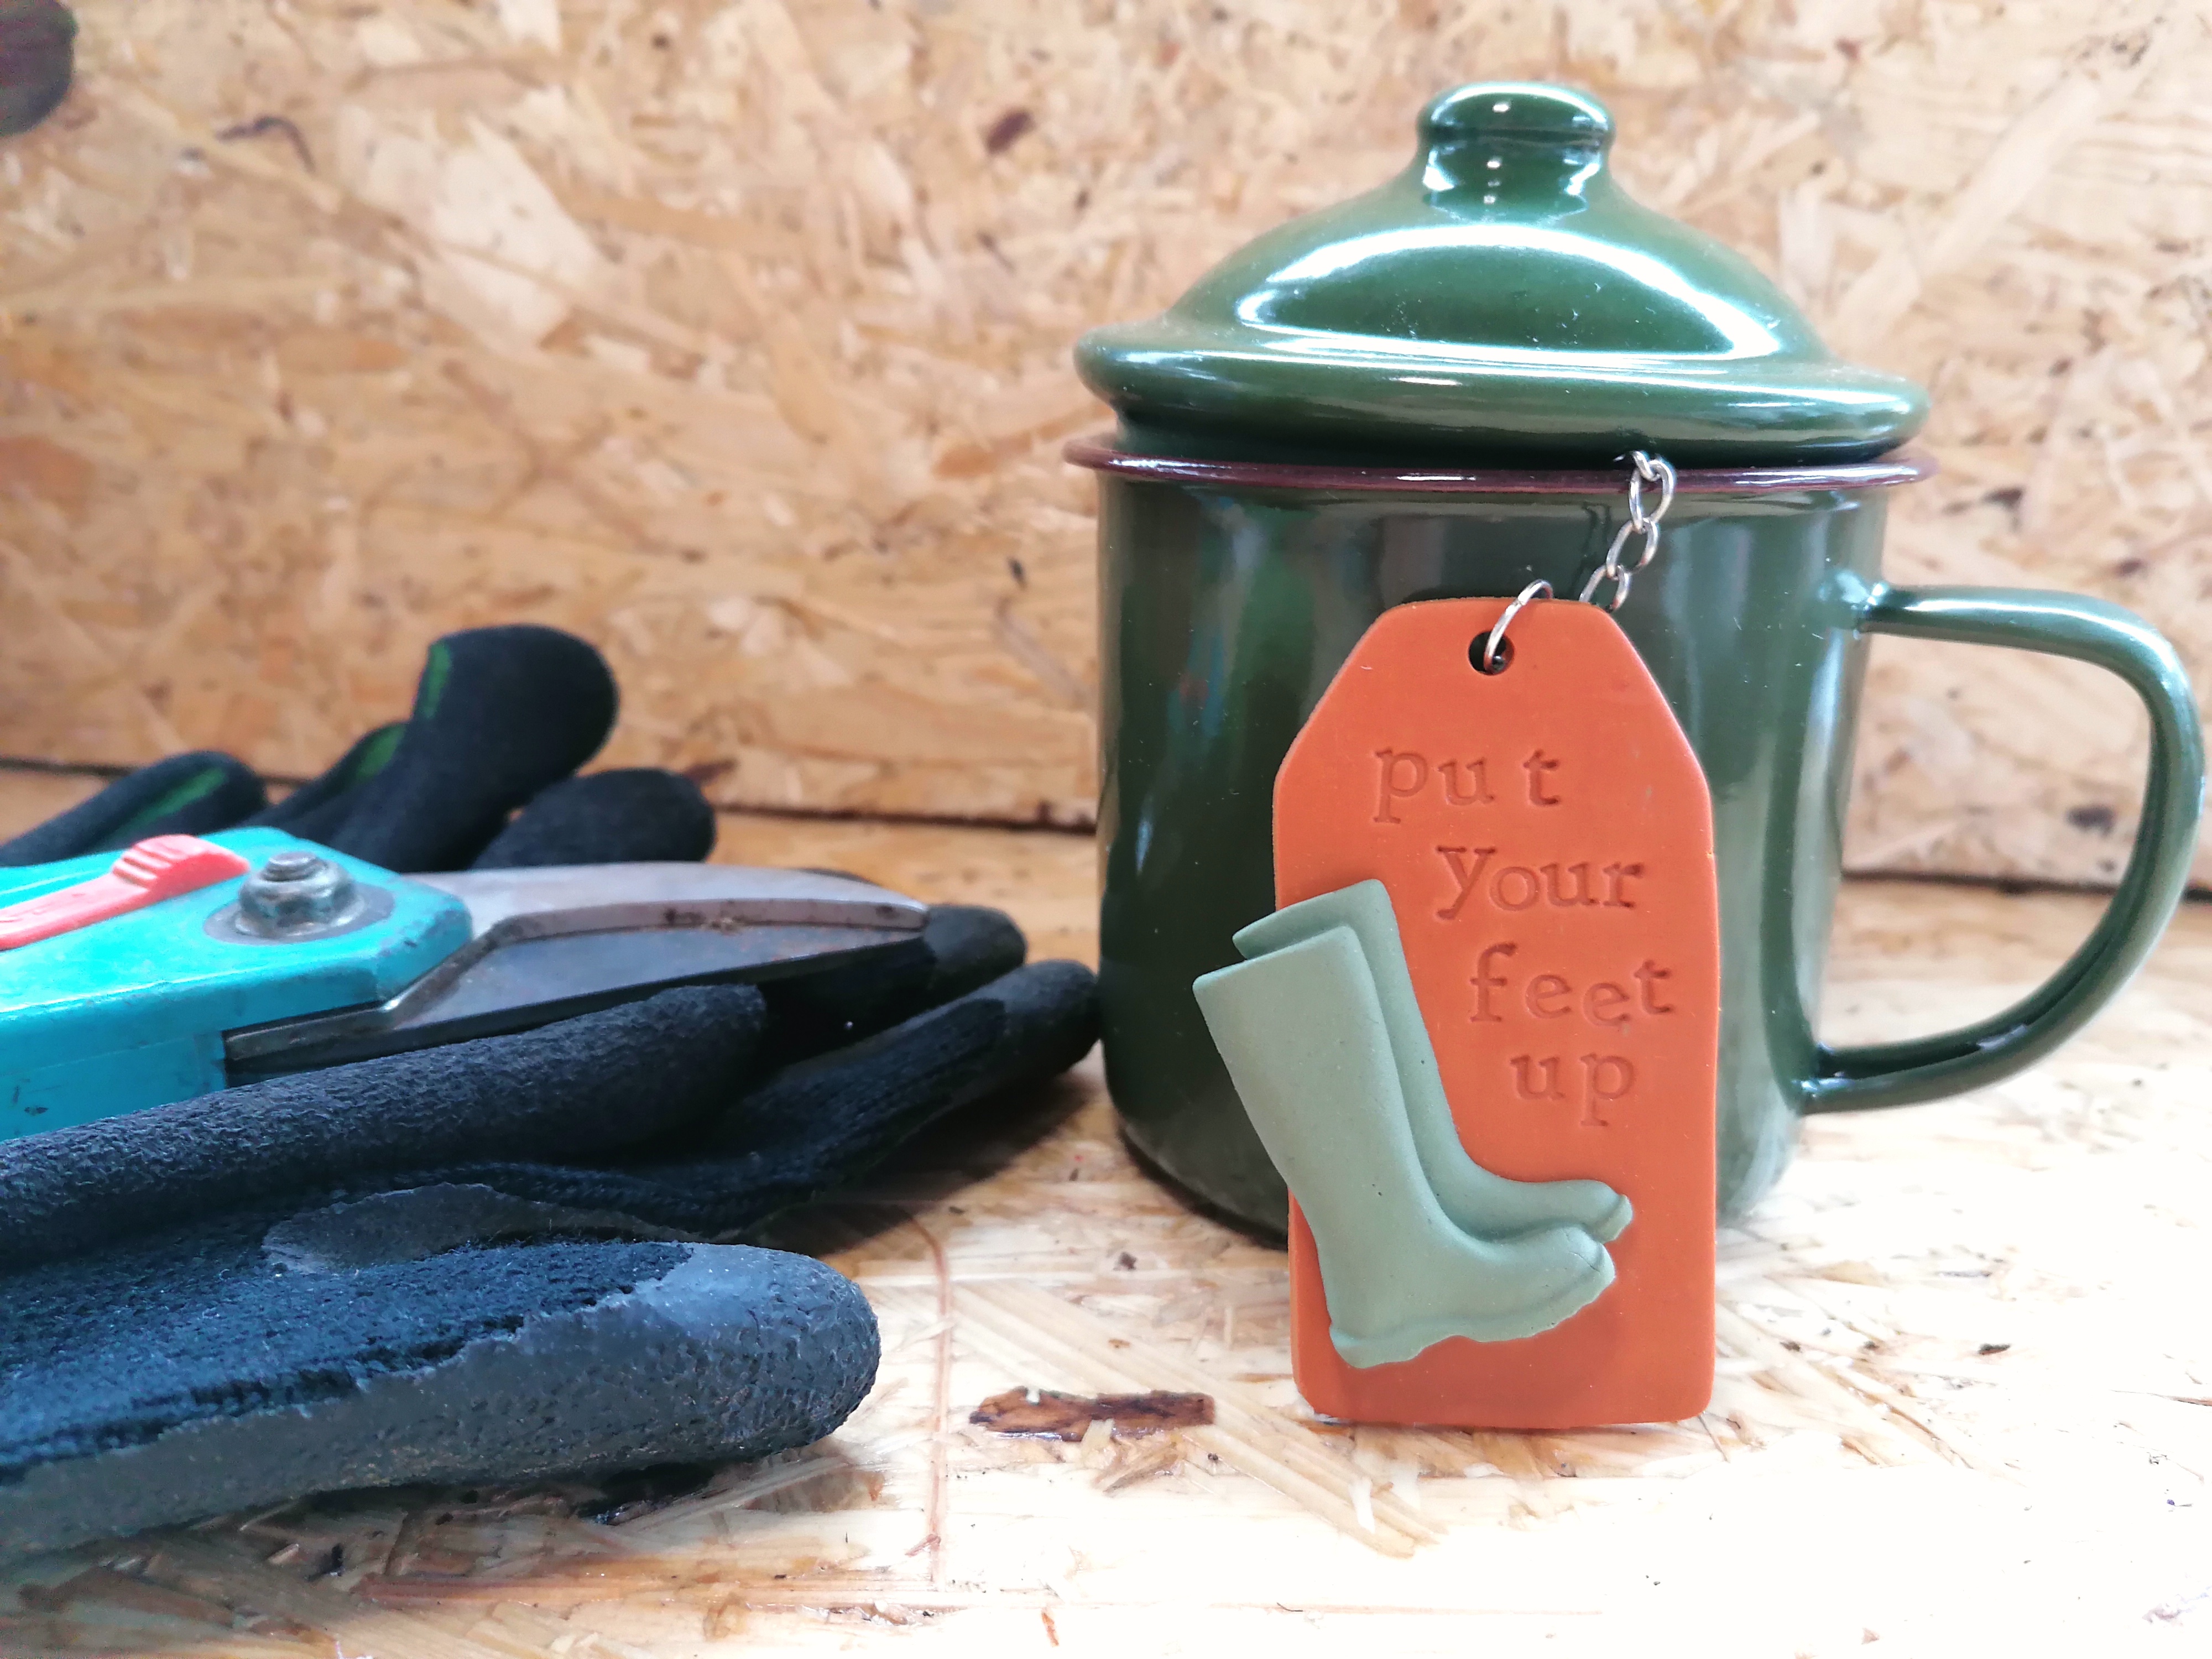 New! Put Your Feet Up Tea Infuser